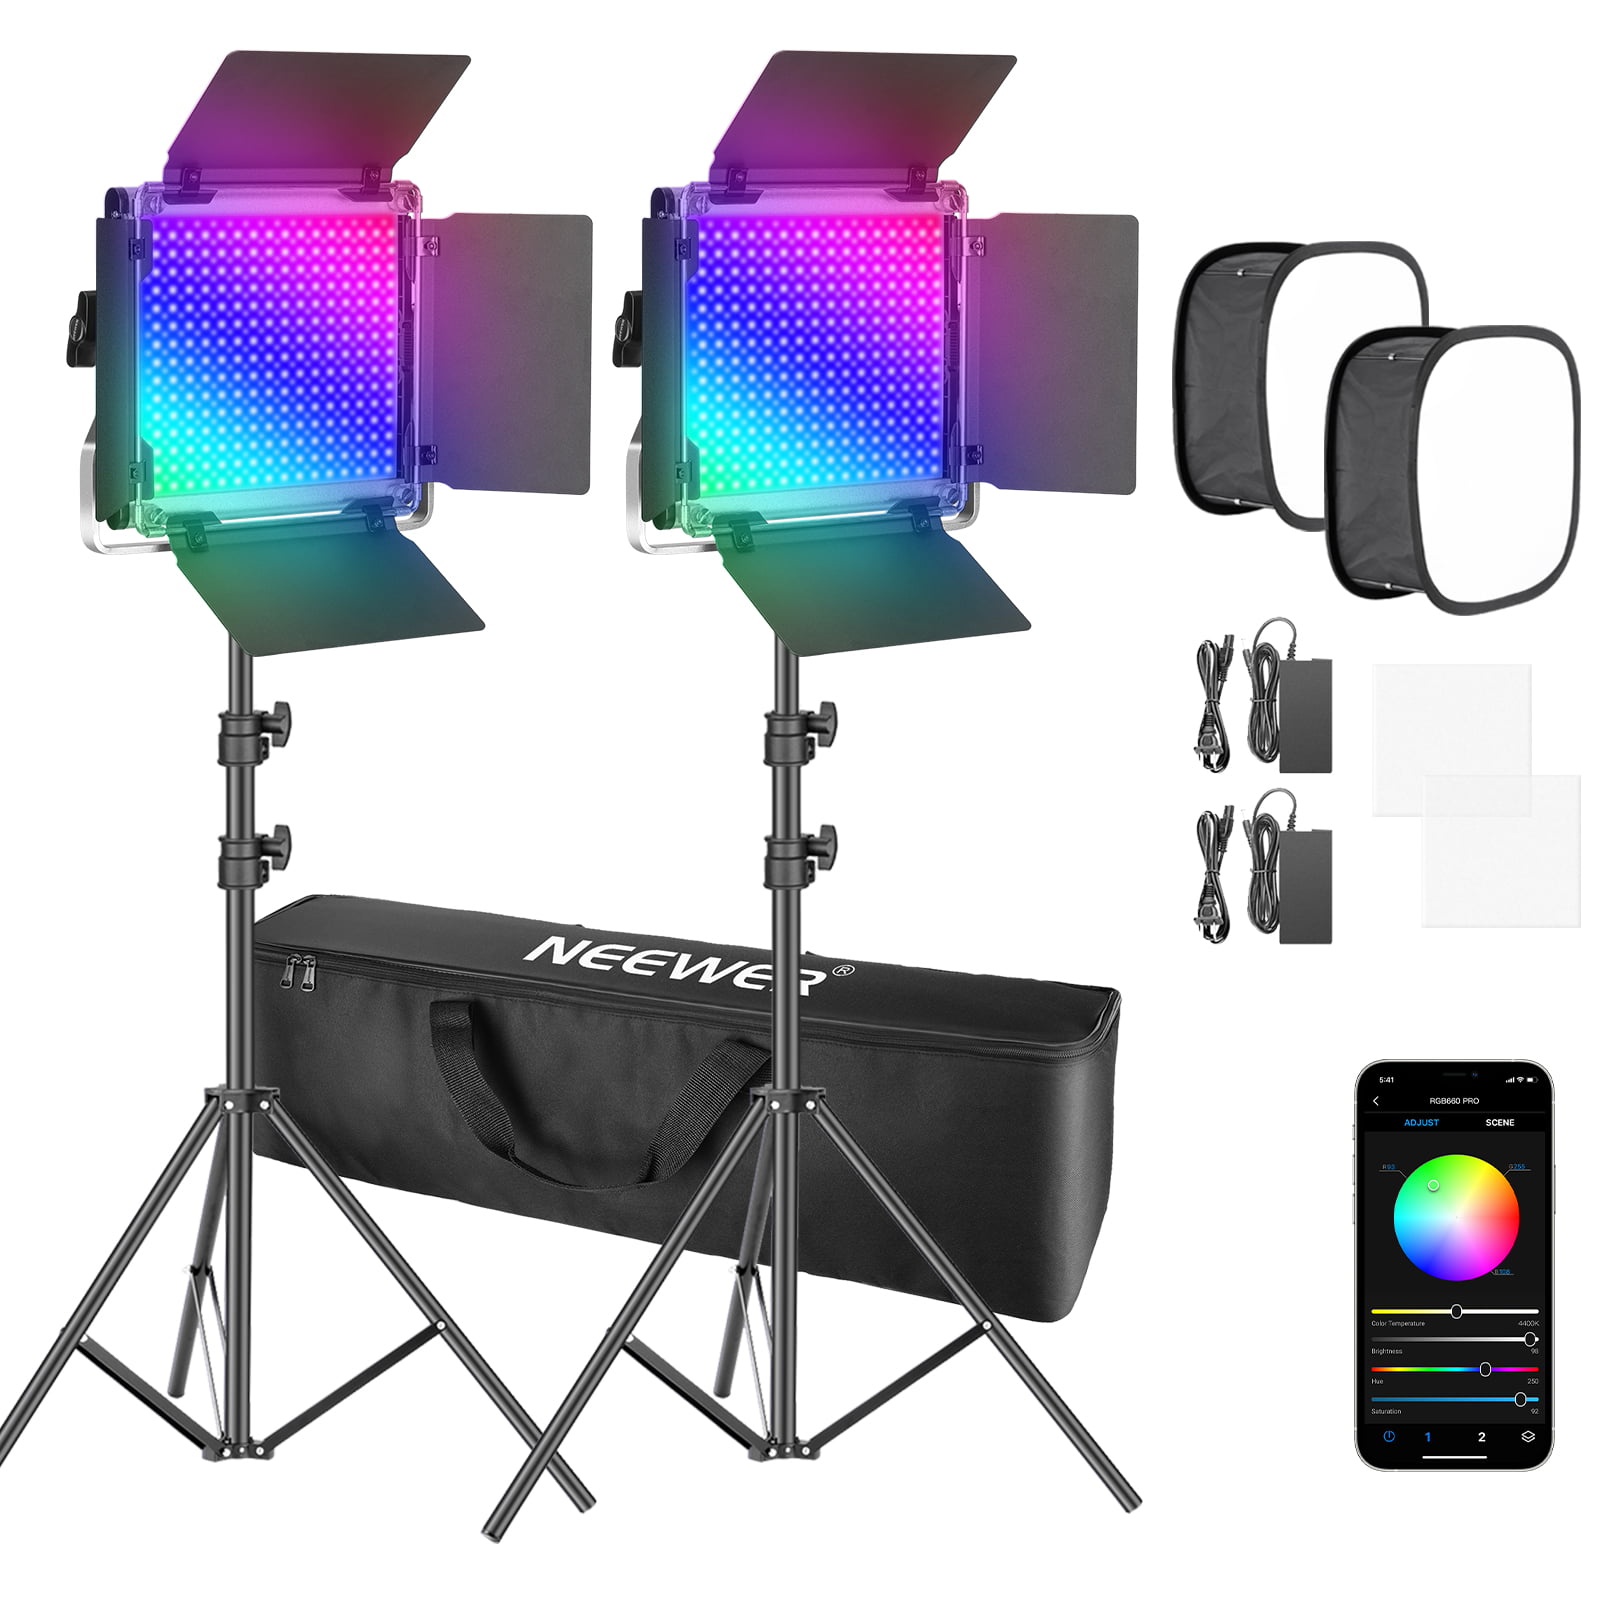 Neewer 2 Packs 660 PRO RGB Led Video Light with APP Control Softbox Kit,360°Full Color,50W Video Lighting 97+ for Gaming,Streaming,Zoom,YouTube,Webex,Broadcasting,Web Conference,Photography - Walmart.com